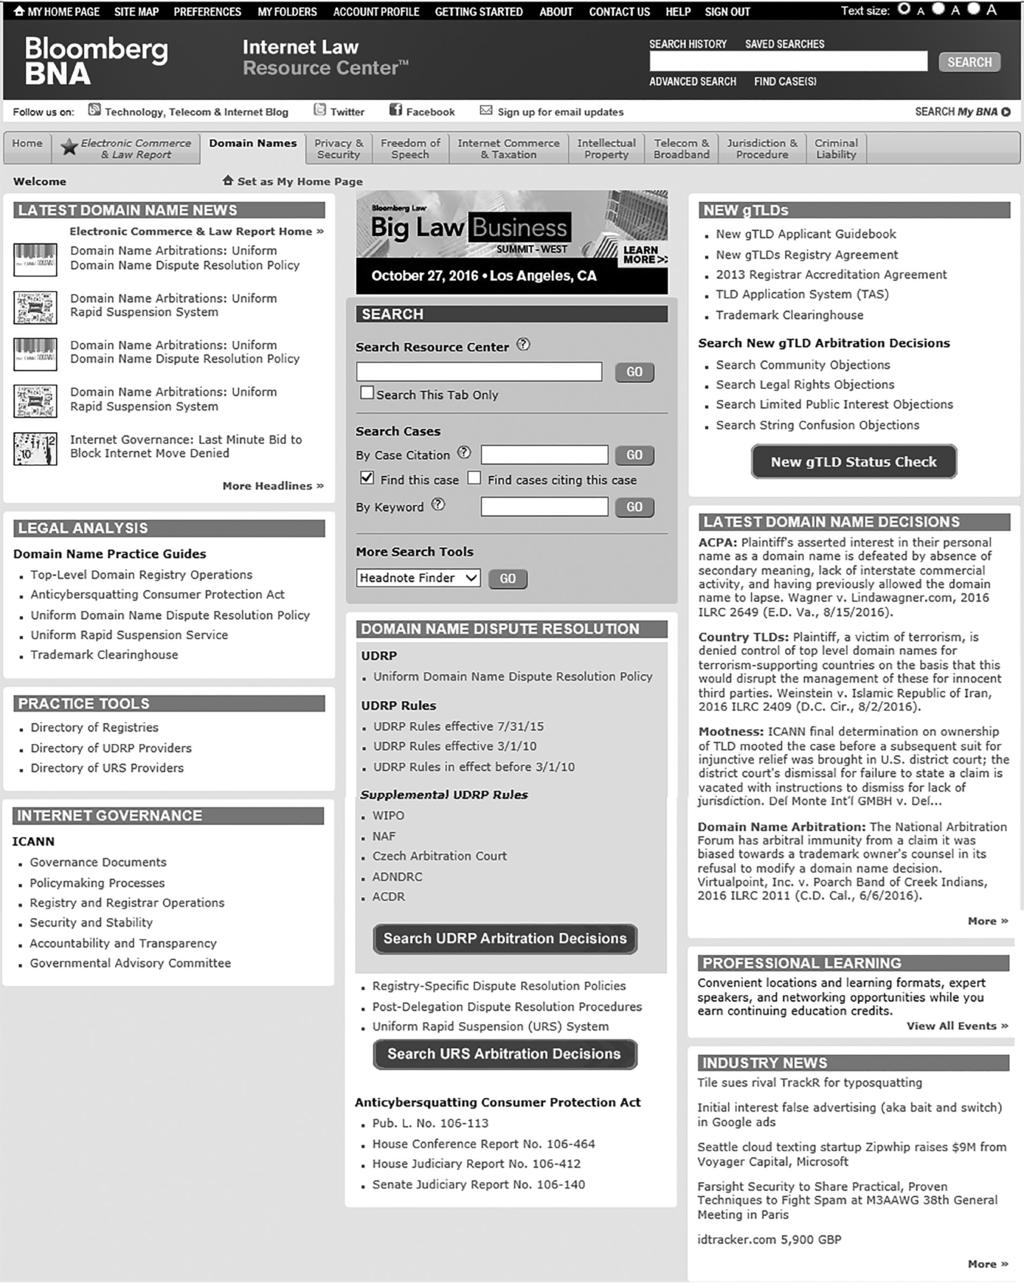 TOPIC HOME PAGES Topic home pages consolidate the cases,